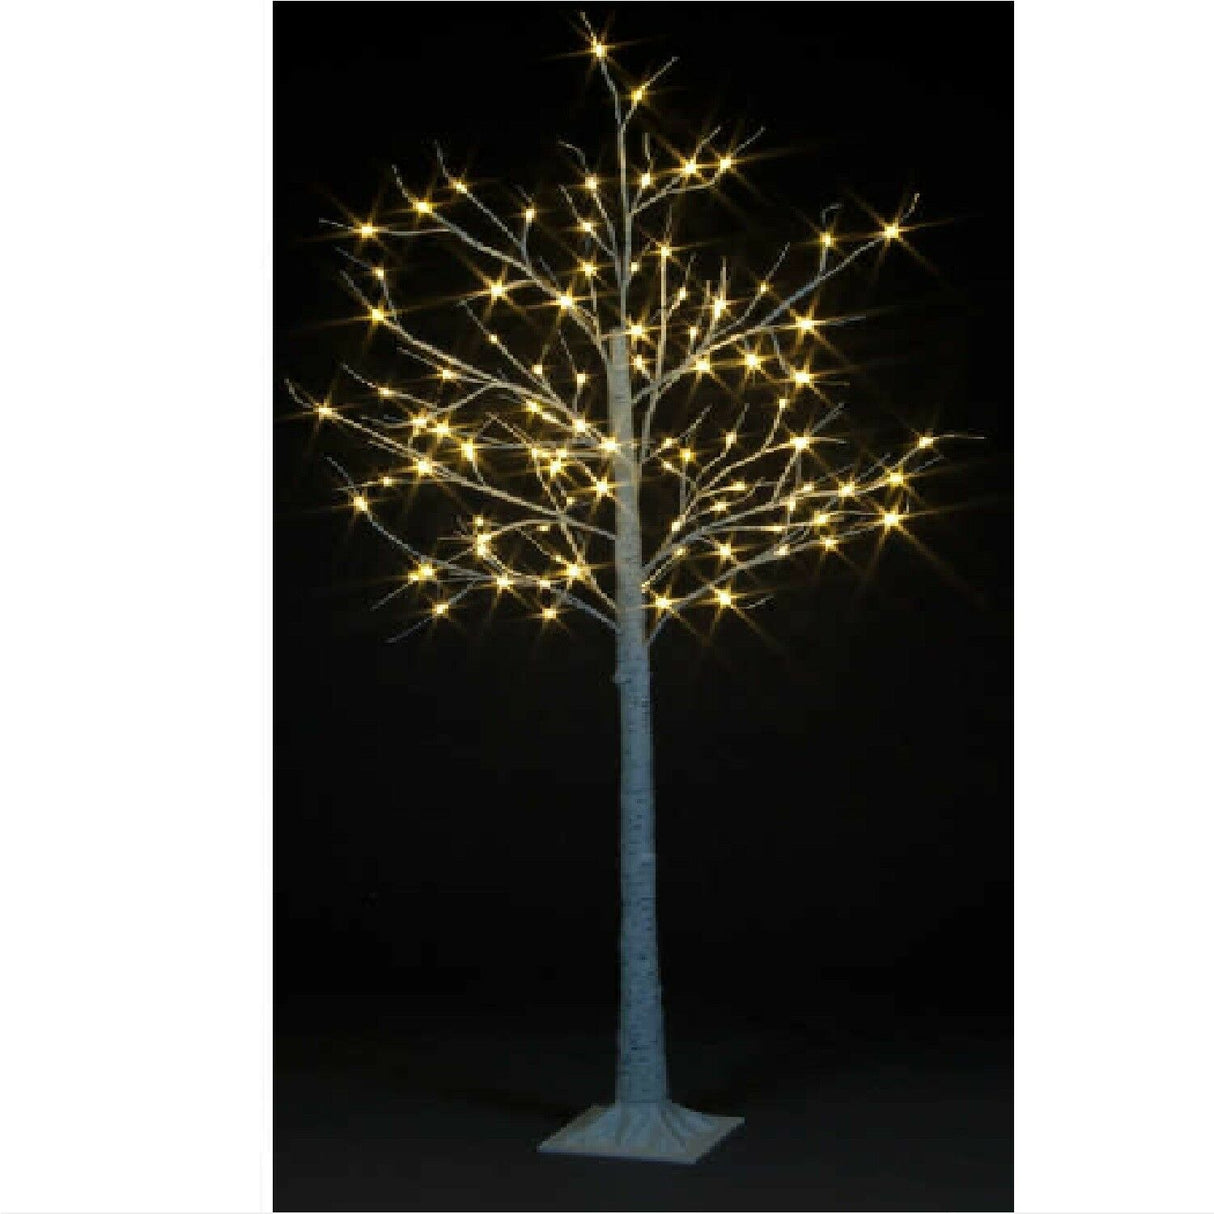 1.2m Birch Tree with 48 Warm White LEDs - Twinkling